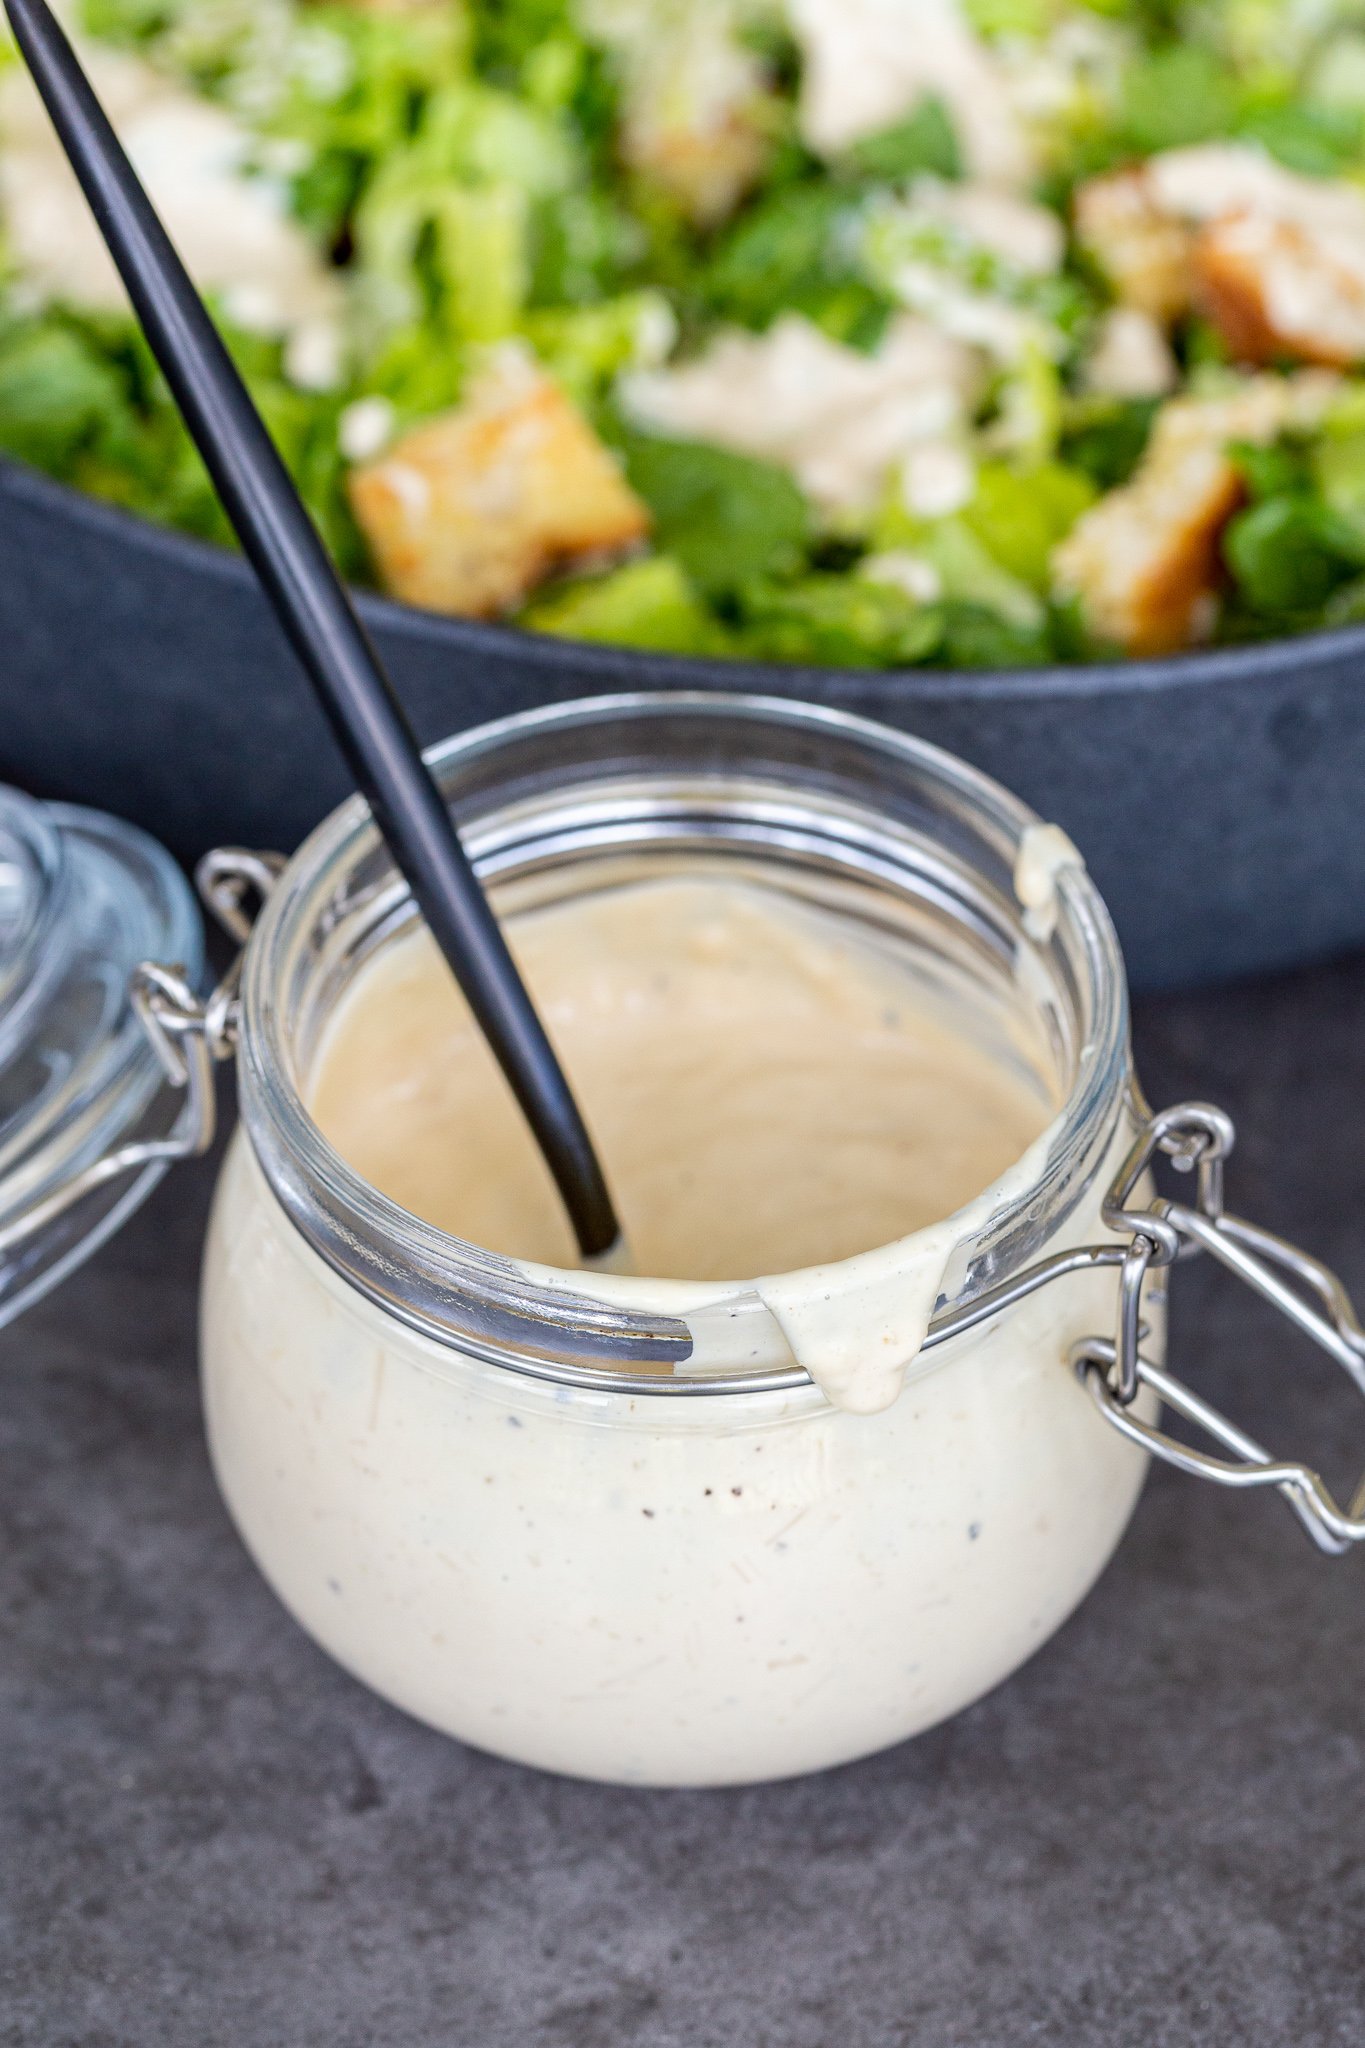 Salad Dressing Bottle With Recipes